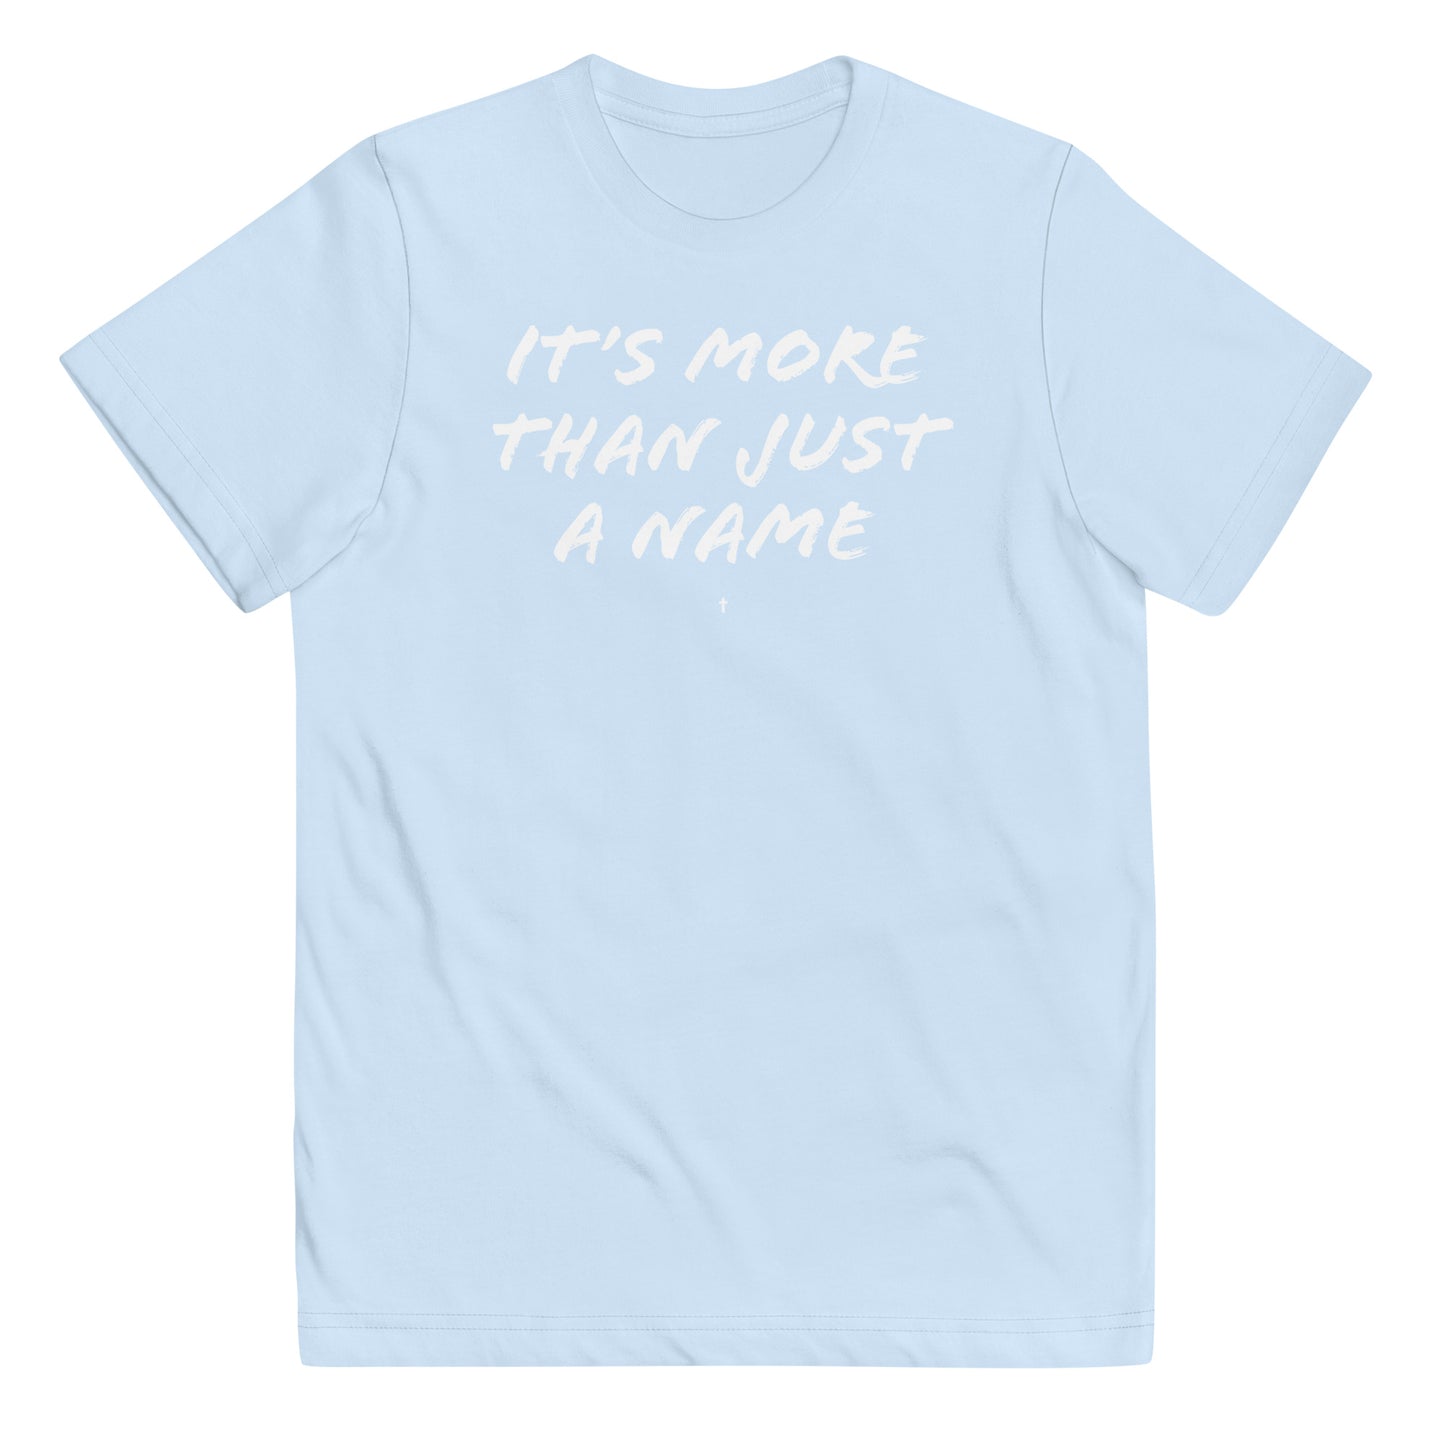 MTJN QUOTE YOUTH - The General Booty Official Shop by More Than Just A Name | MTJN